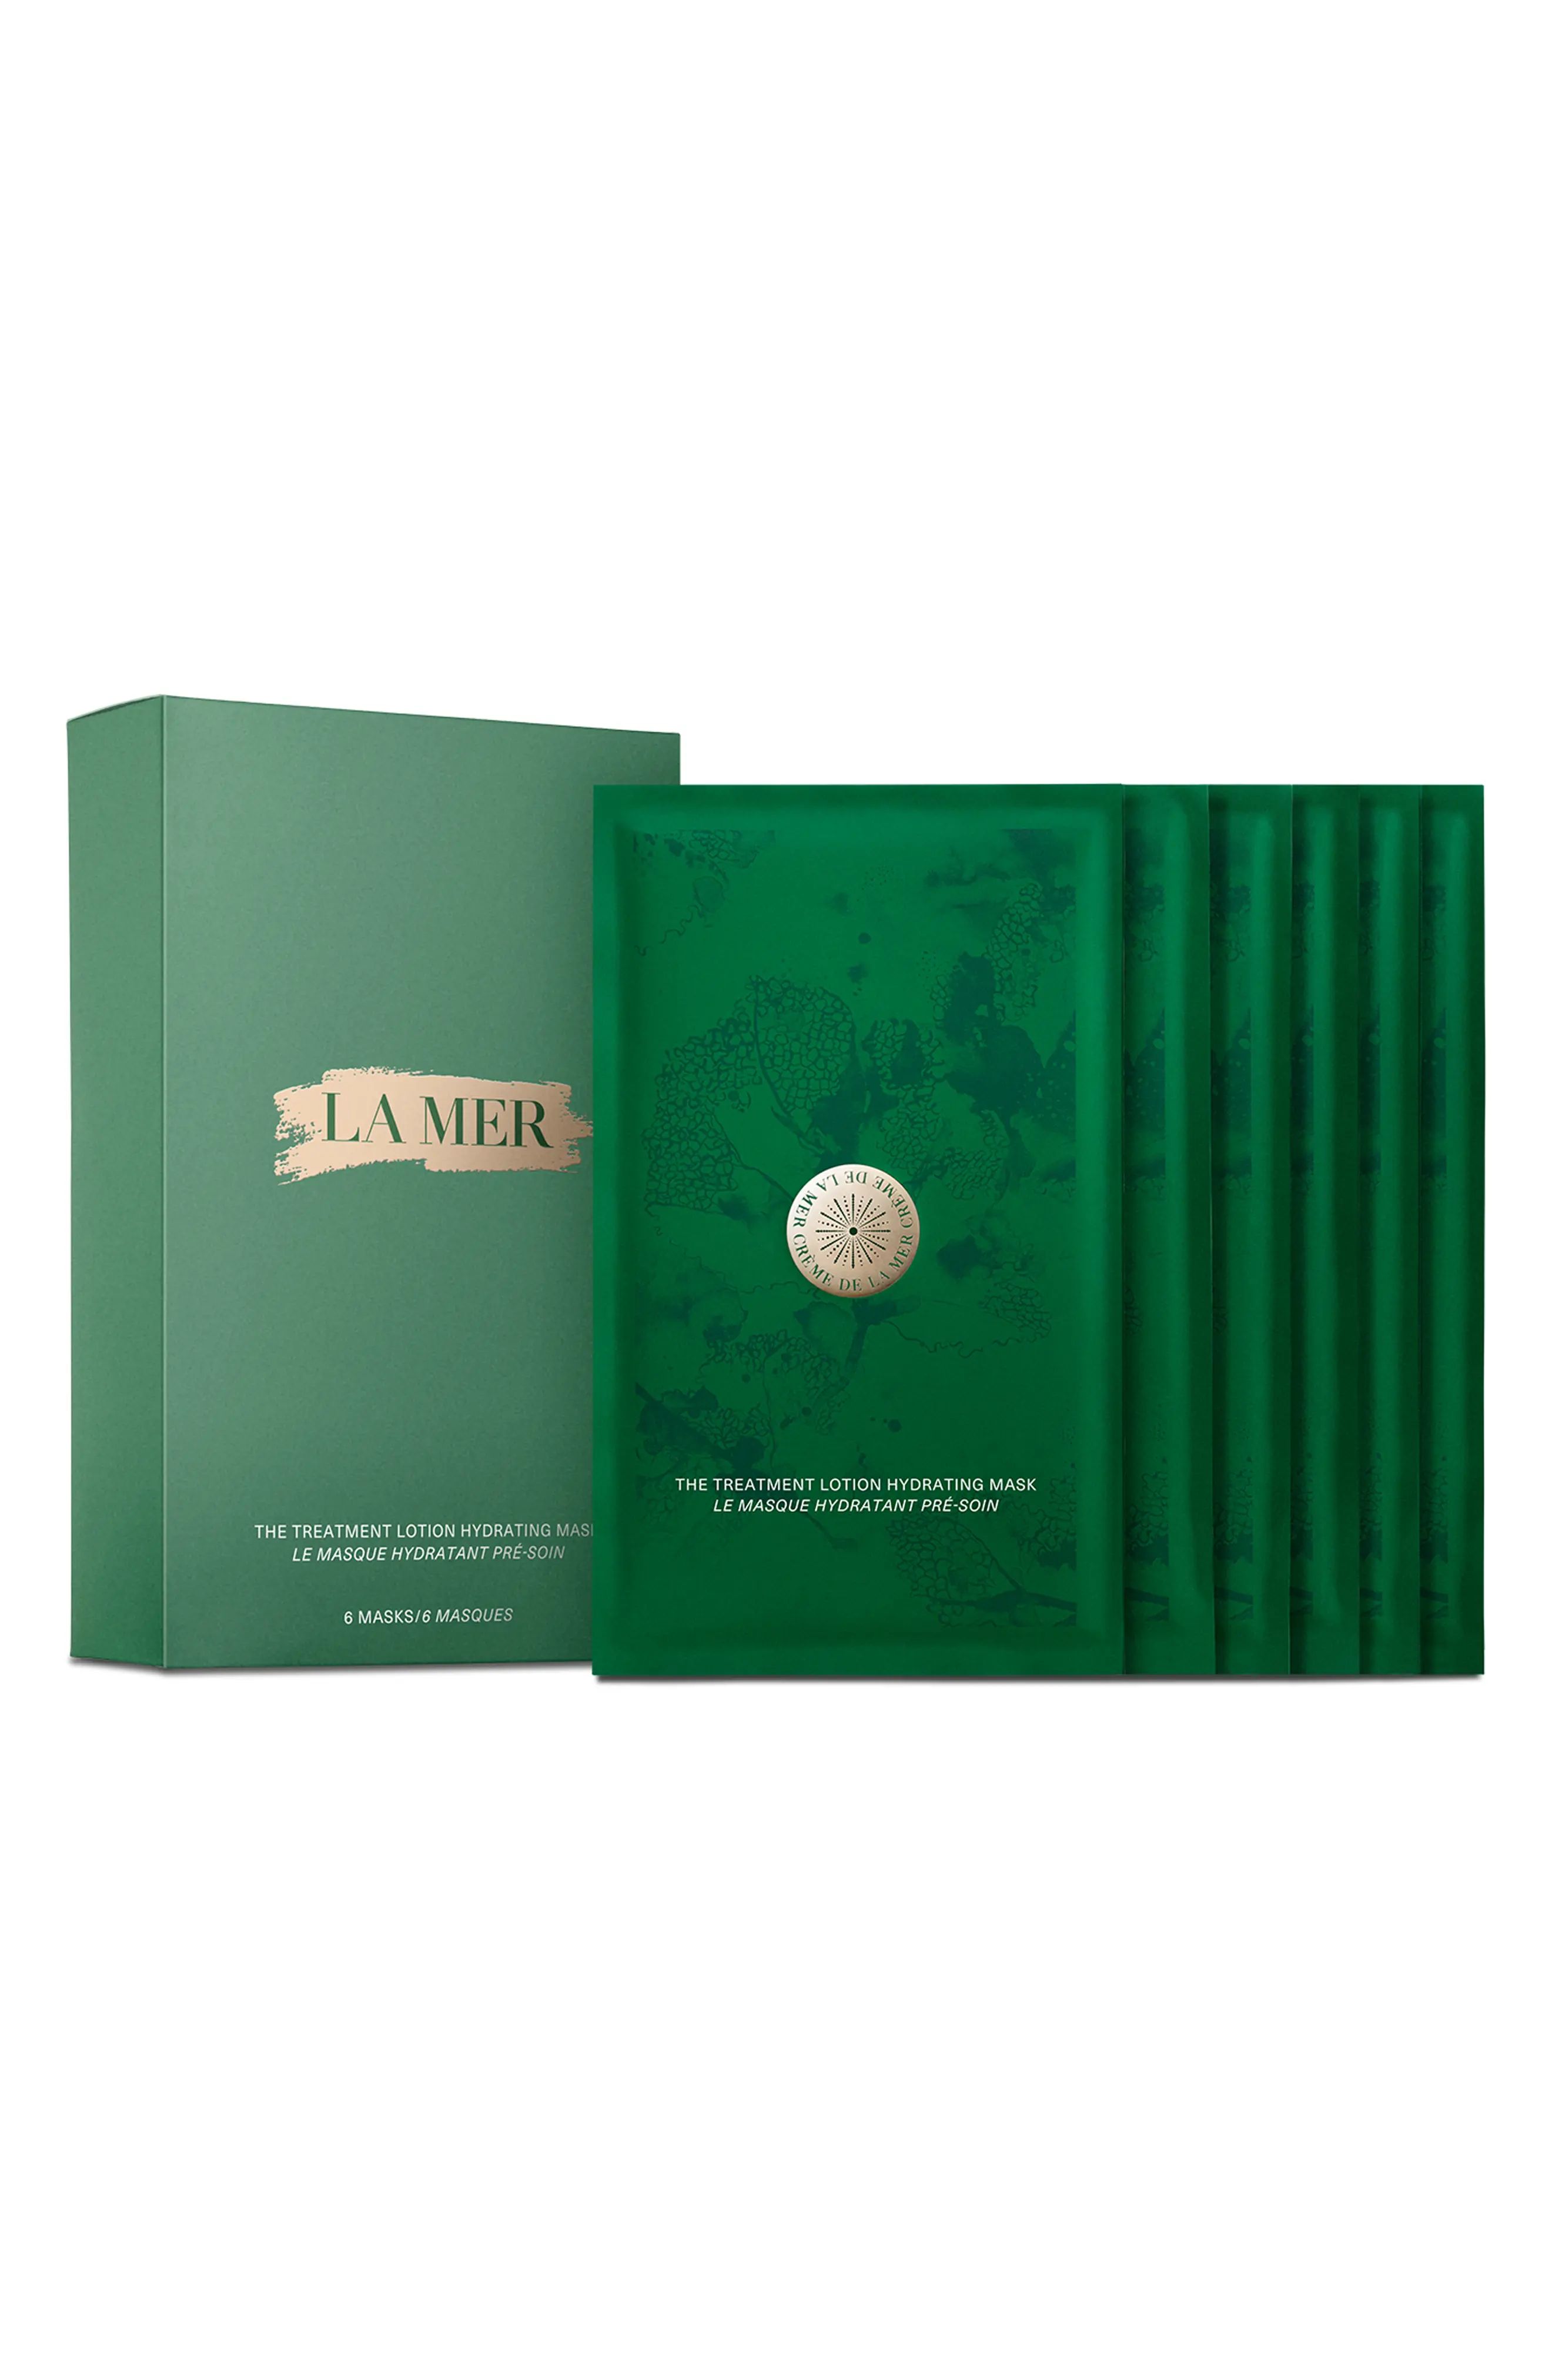 La Mer The Treatment Lotion Hydrating Mask | Nordstrom